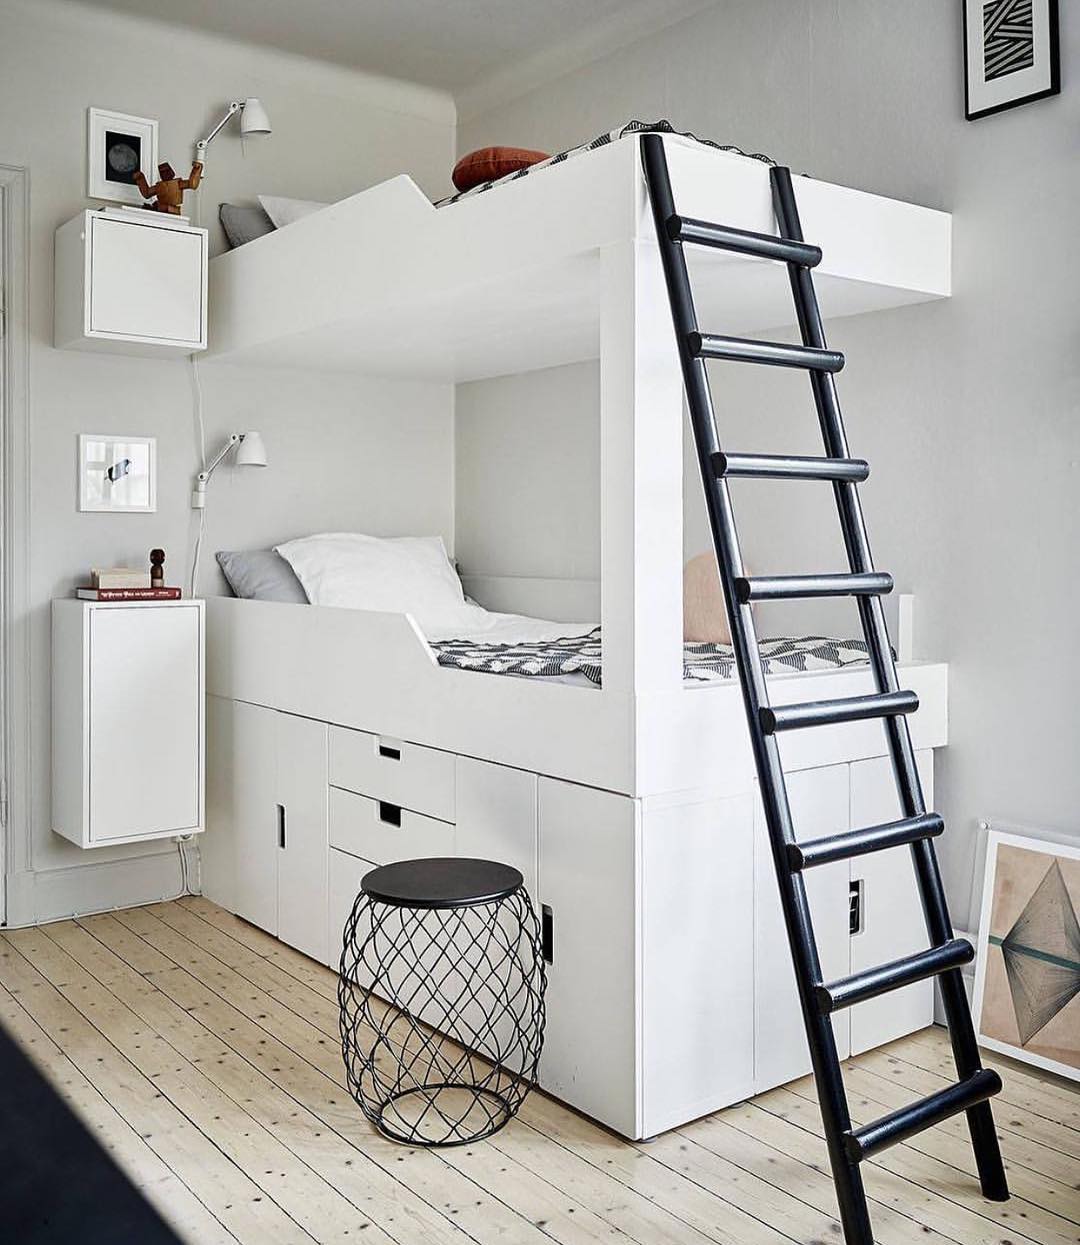 Ideas For Designing Shared Kids Rooms, Amazing Loft Bed Ideas For Small Rooms